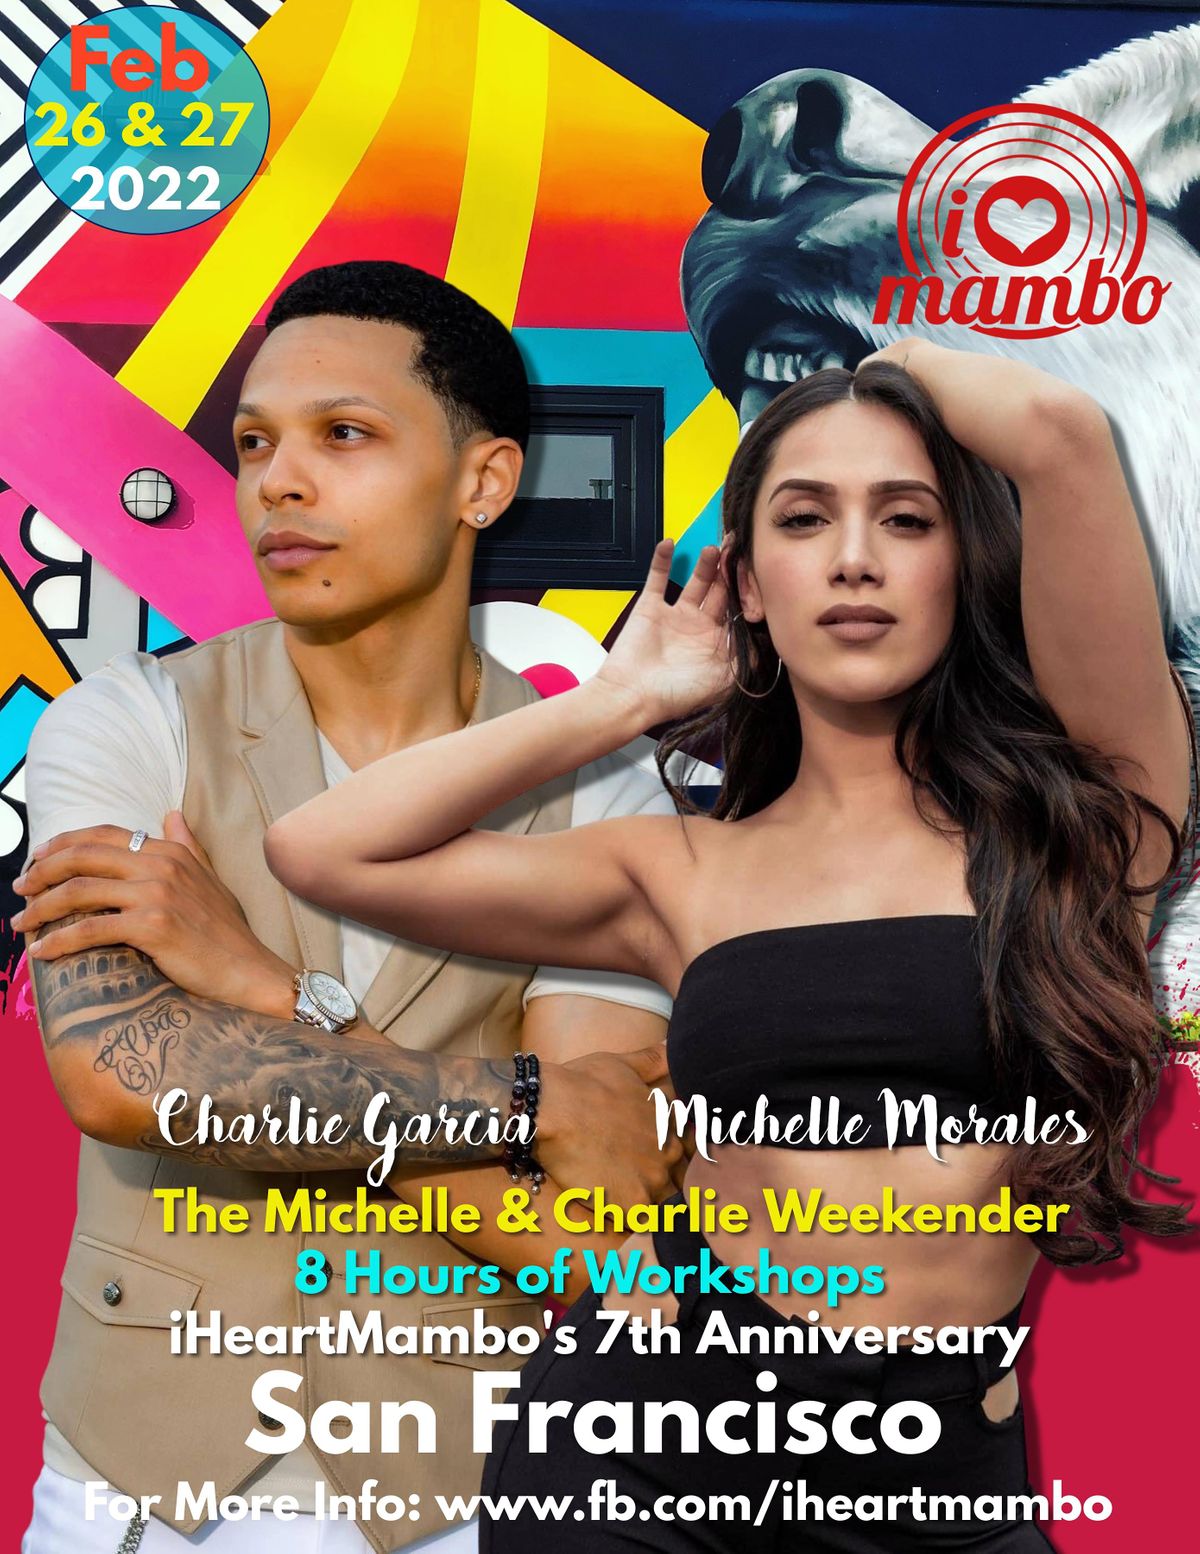 Michelle and Charlie Workshops Feb 26th & 27th 2022 Hosted by iHeartMambo